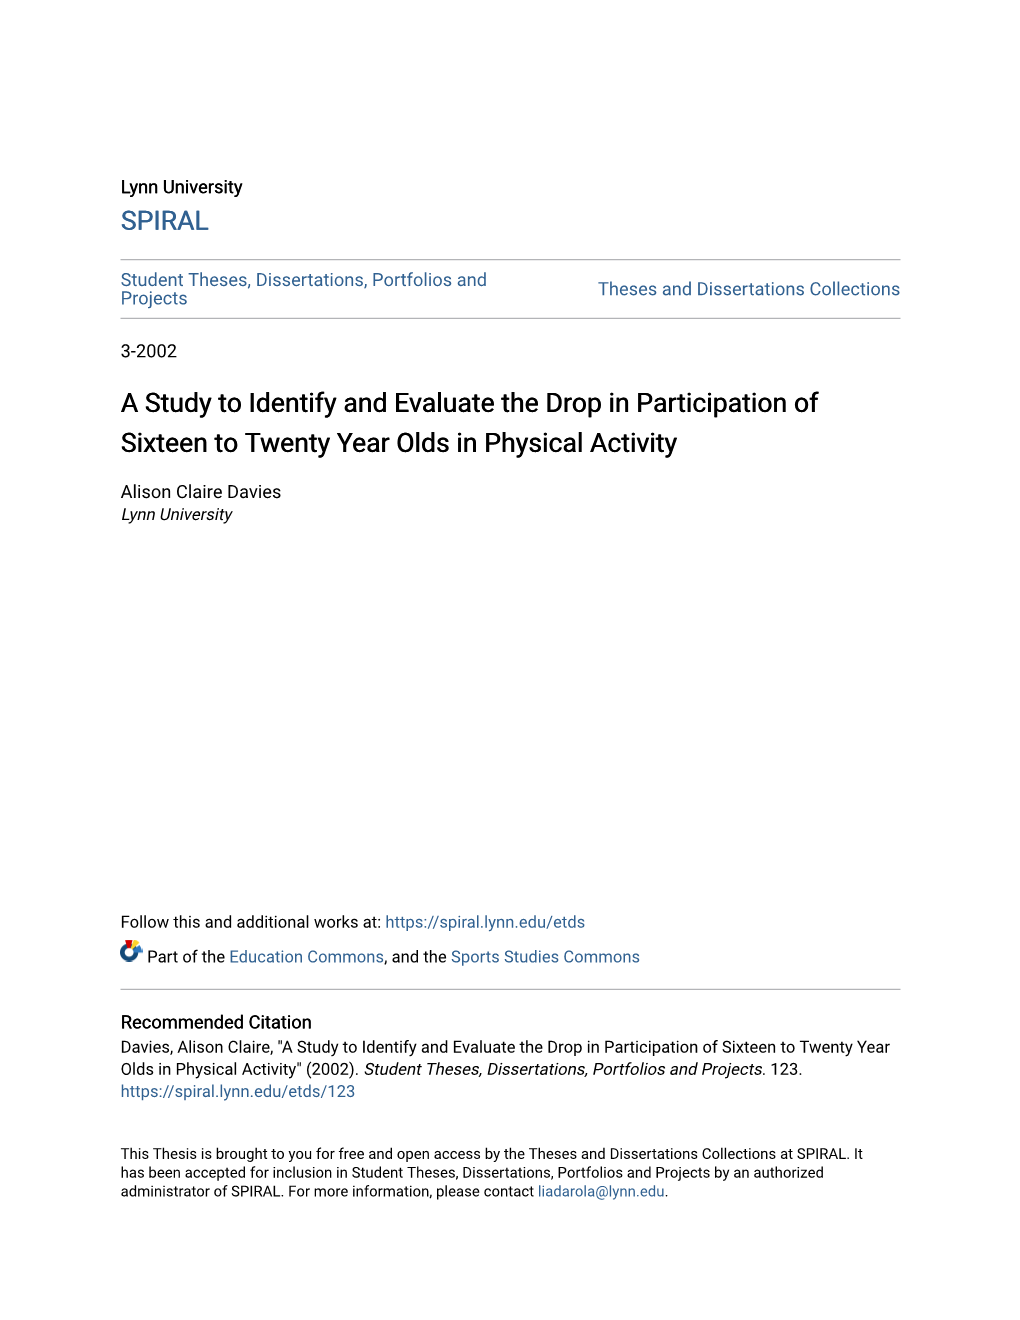 A Study to Identify and Evaluate the Drop in Participation of Sixteen to Twenty Year Olds in Physical Activity